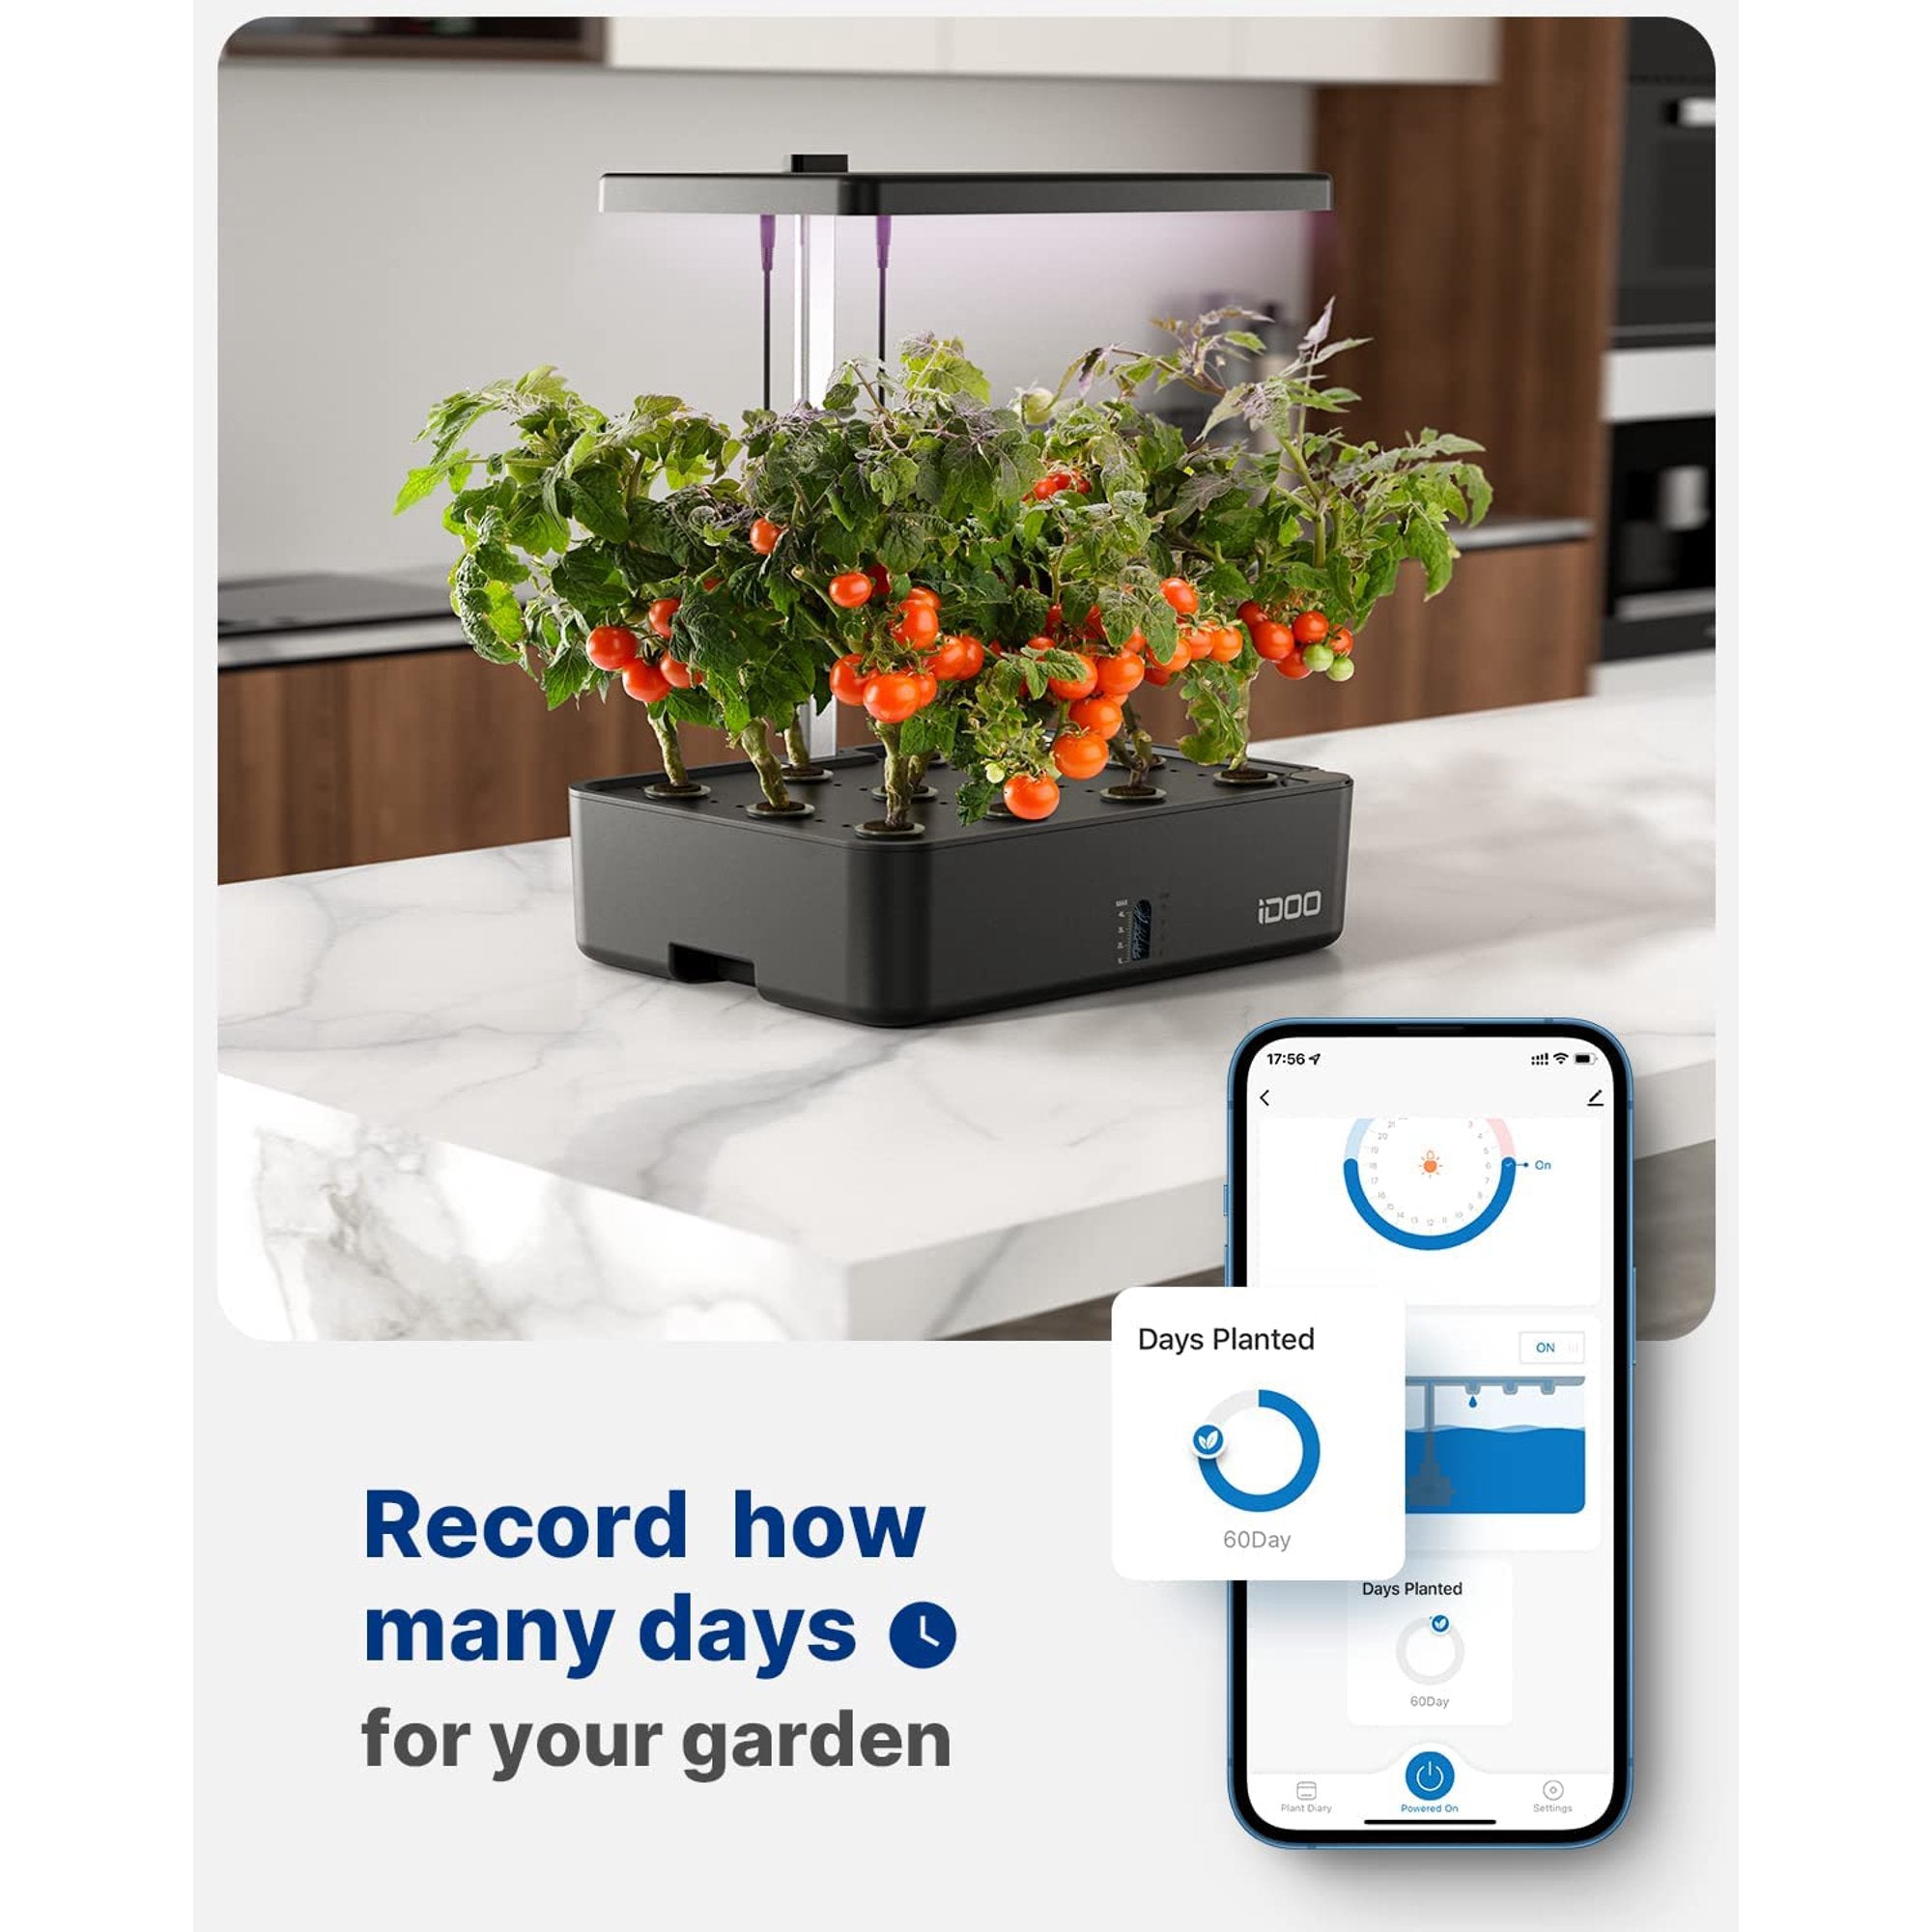 iDOO WiFi 12 Pods Hydroponics Growing System with APP Controlled, Indoor Garden for Home Kitchen Gardening - Hydroponic Growing System Hydroponic Growing Systems by idoo